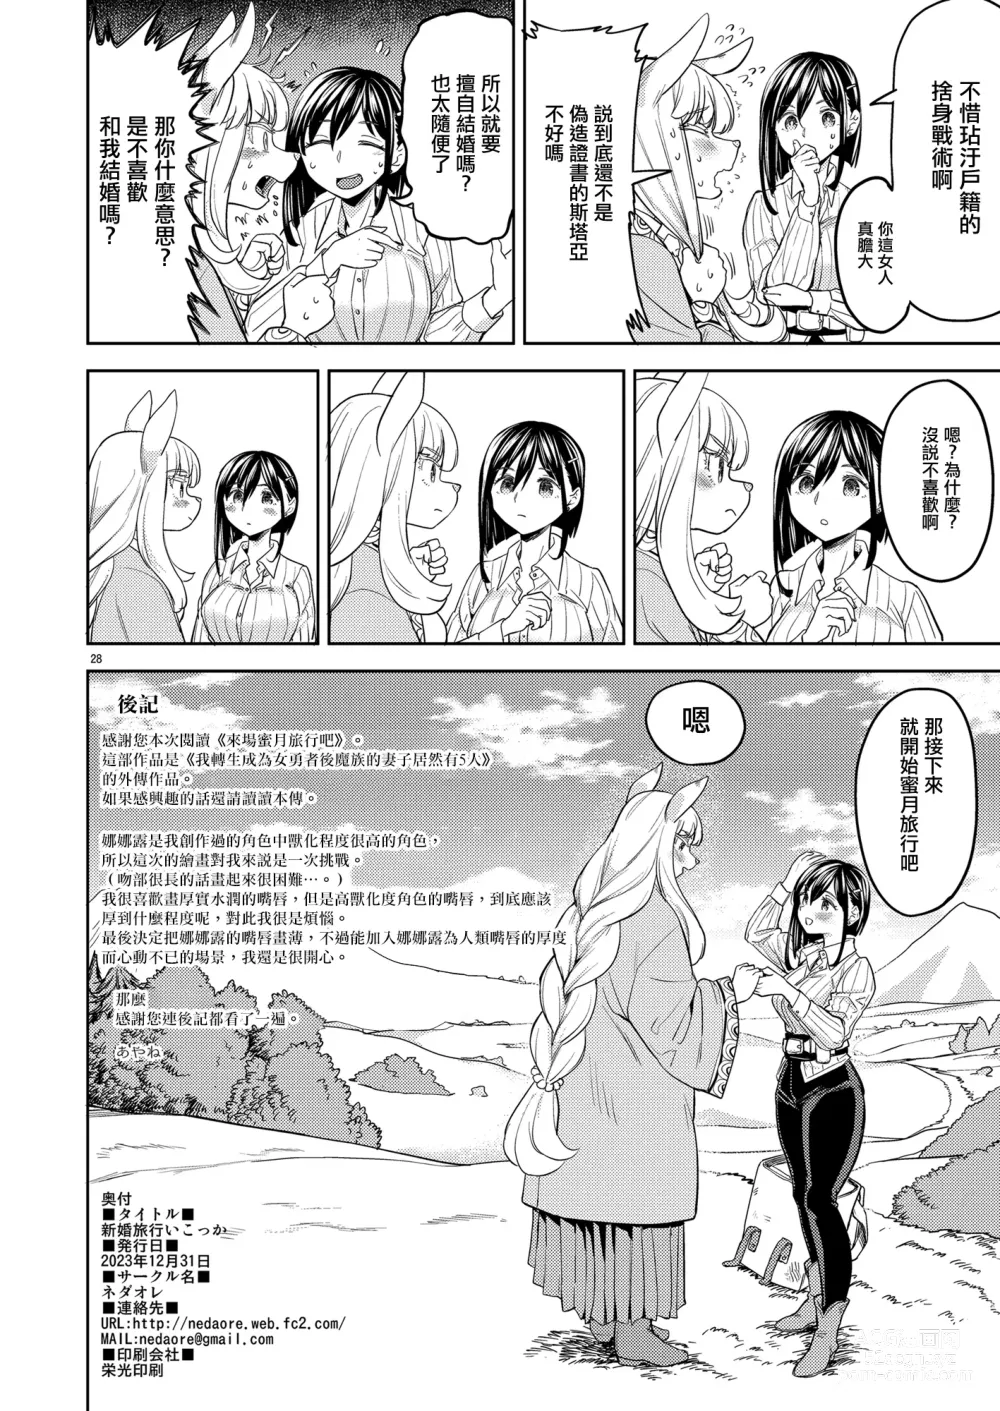 Page 32 of doujinshi 來一場蜜月旅行